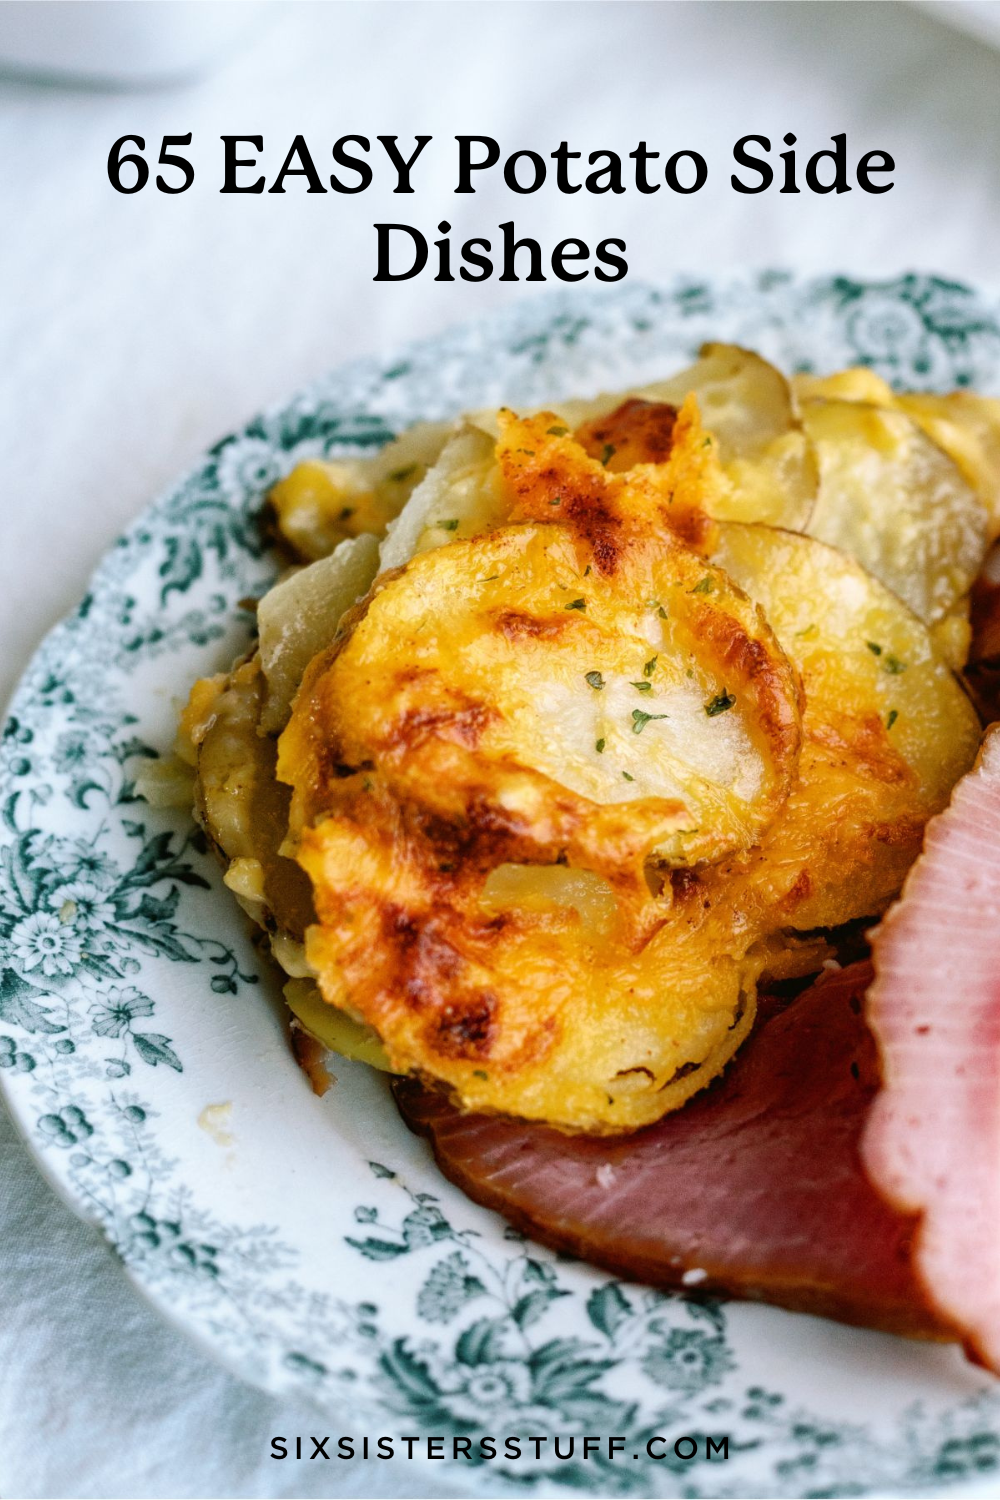 65 EASY Potato Side Dishes